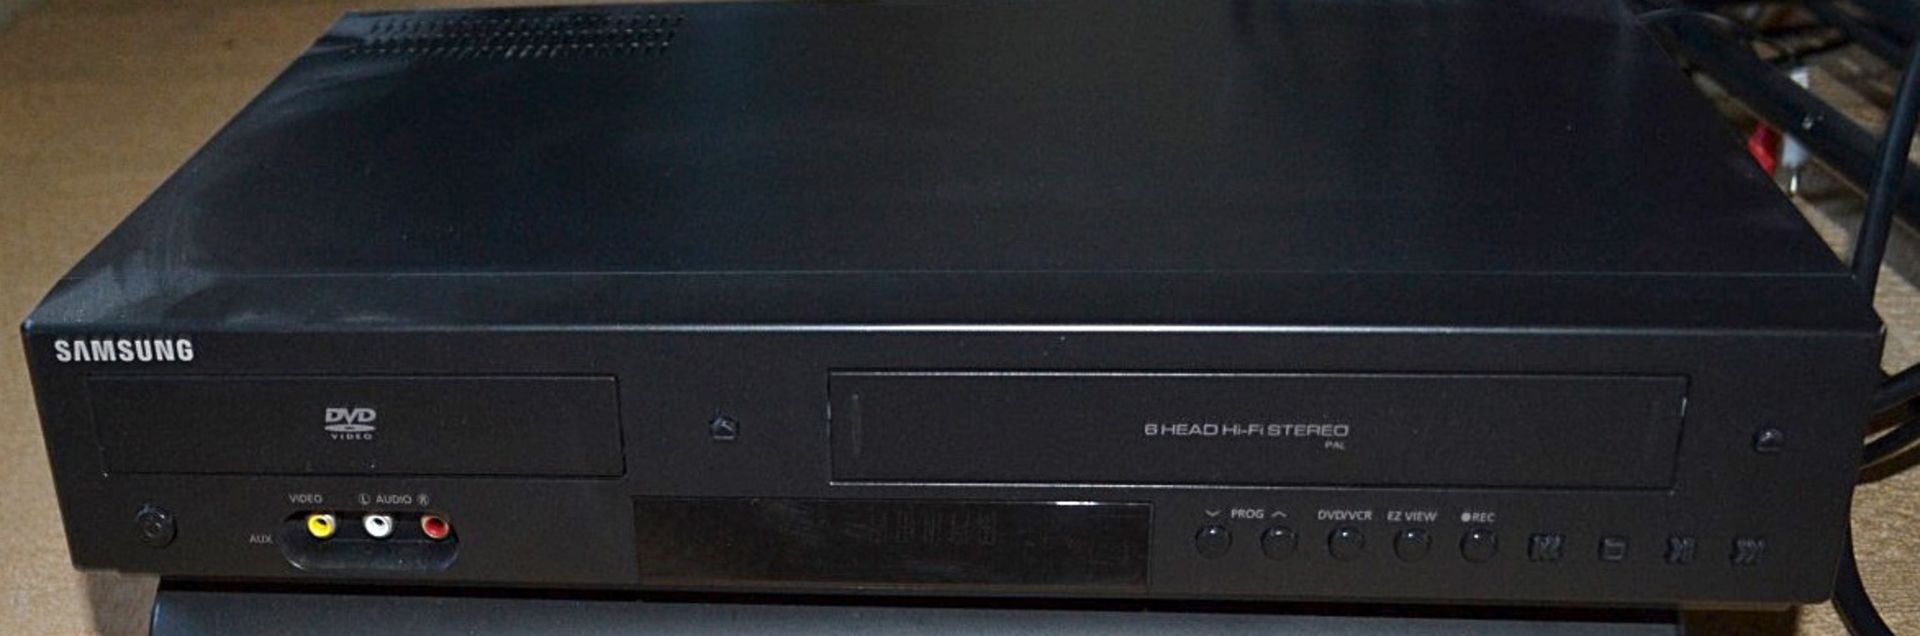 1 x SAMSUNG DVD / Video Combi - Preowned In Good Condition - Ref: KHF231 / BAR - Location: